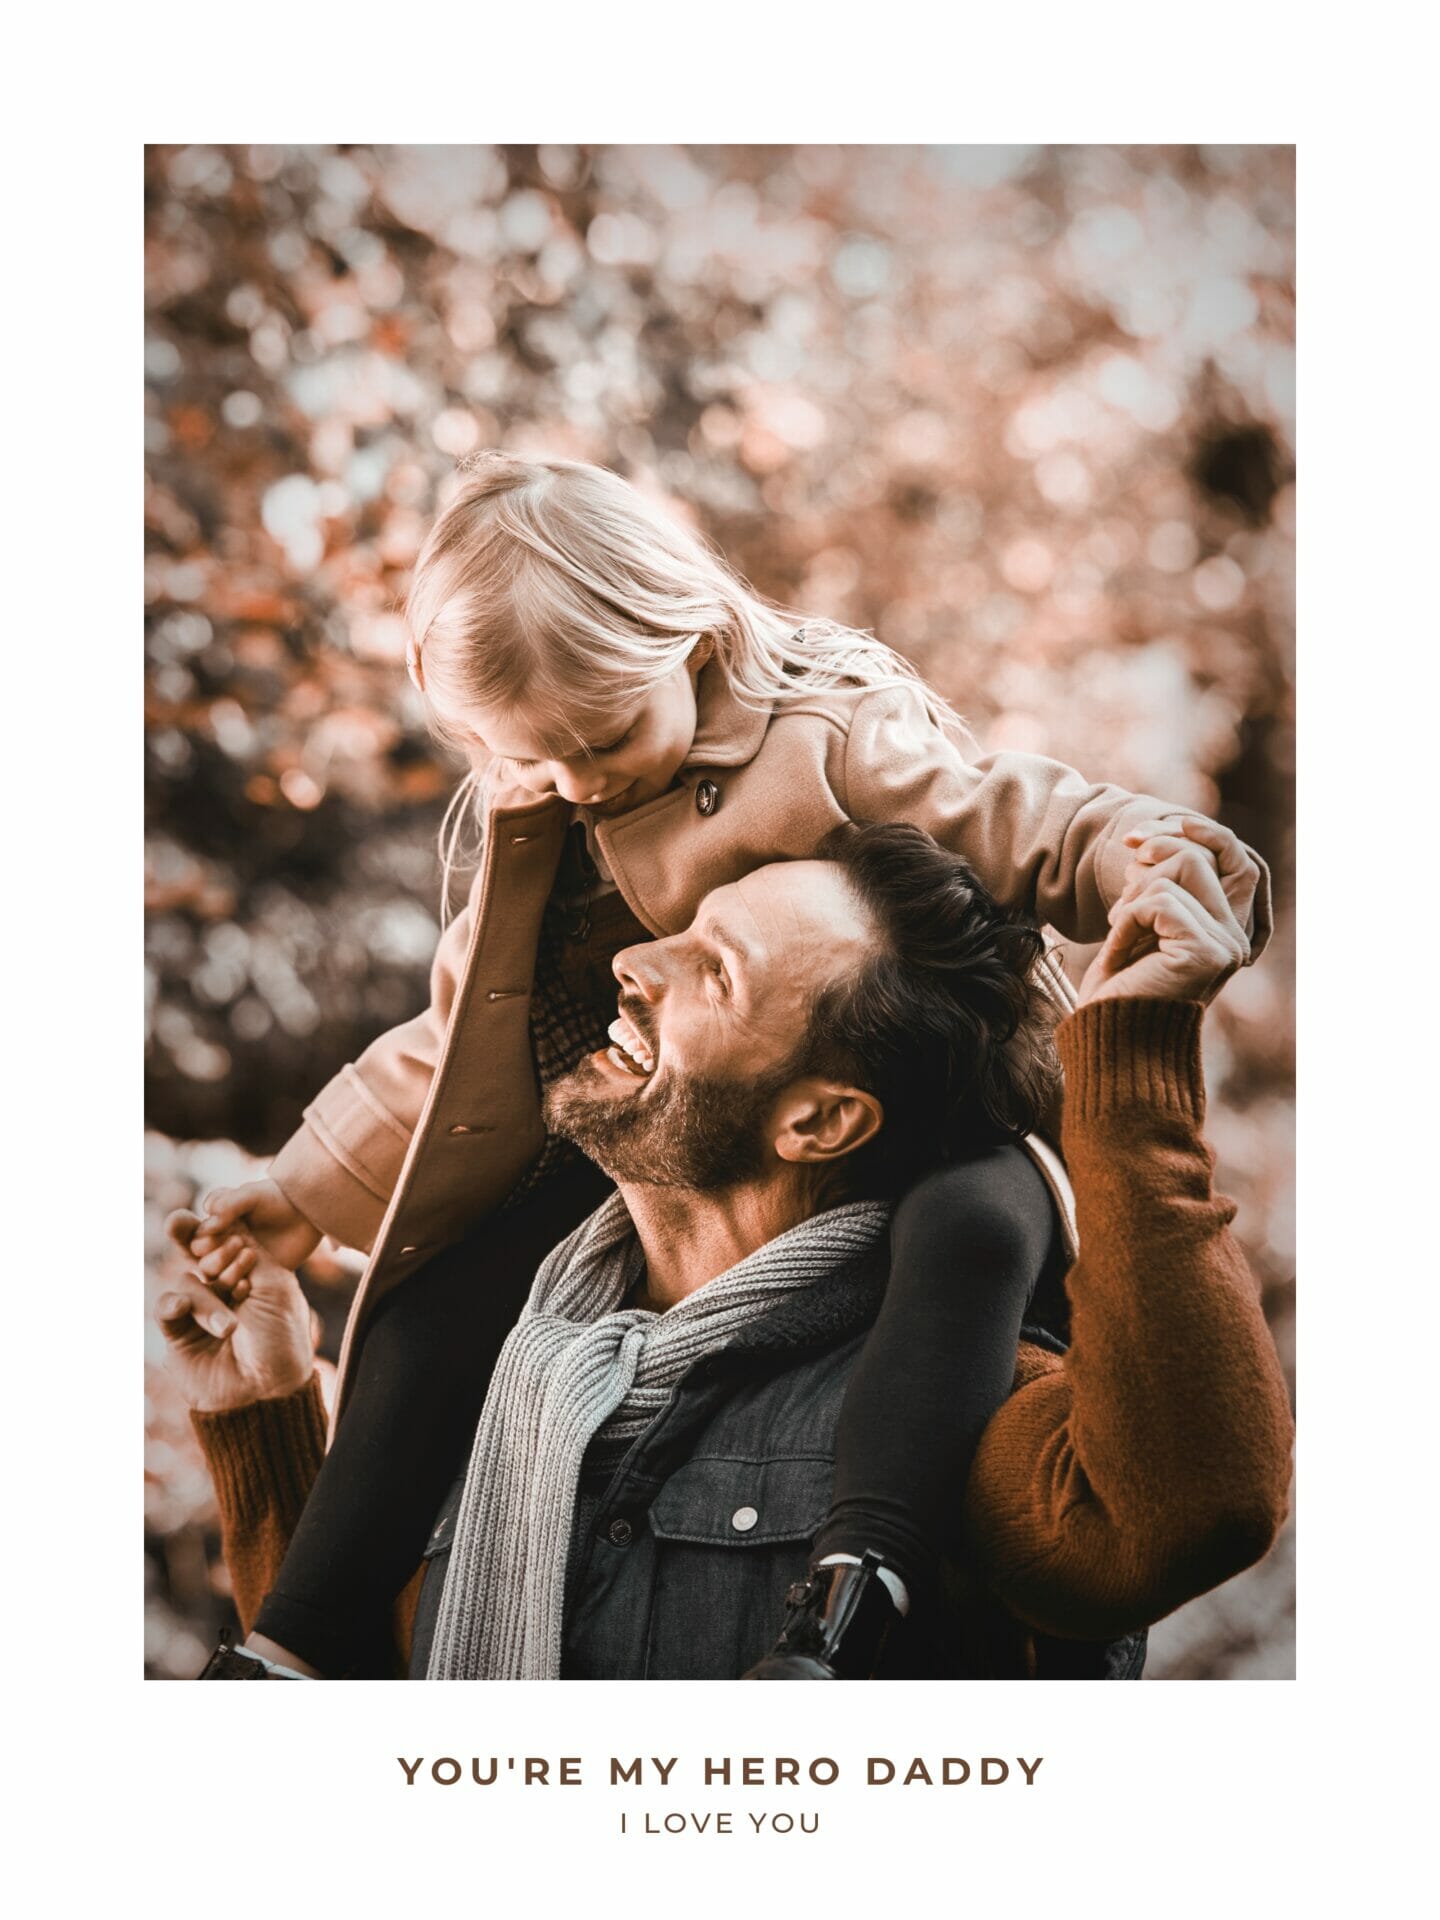 Poster of father carrying daughter on shoulders